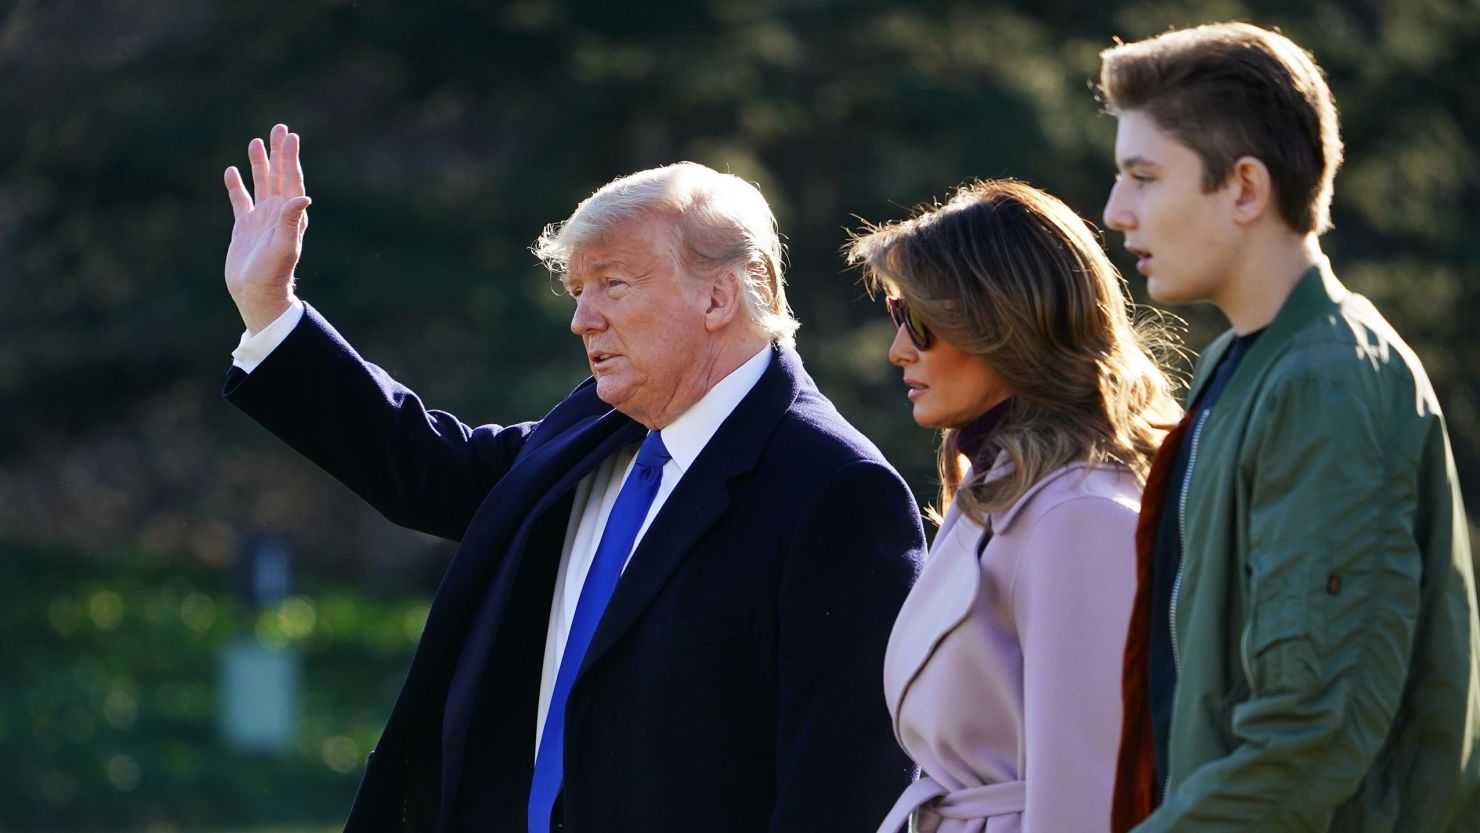 US President Donald Trump, First Lady Melania Trump and son Barron Trump make their way to board Marine One from the South Lawn of the White House in Washington, DC on January 17, 2020. 